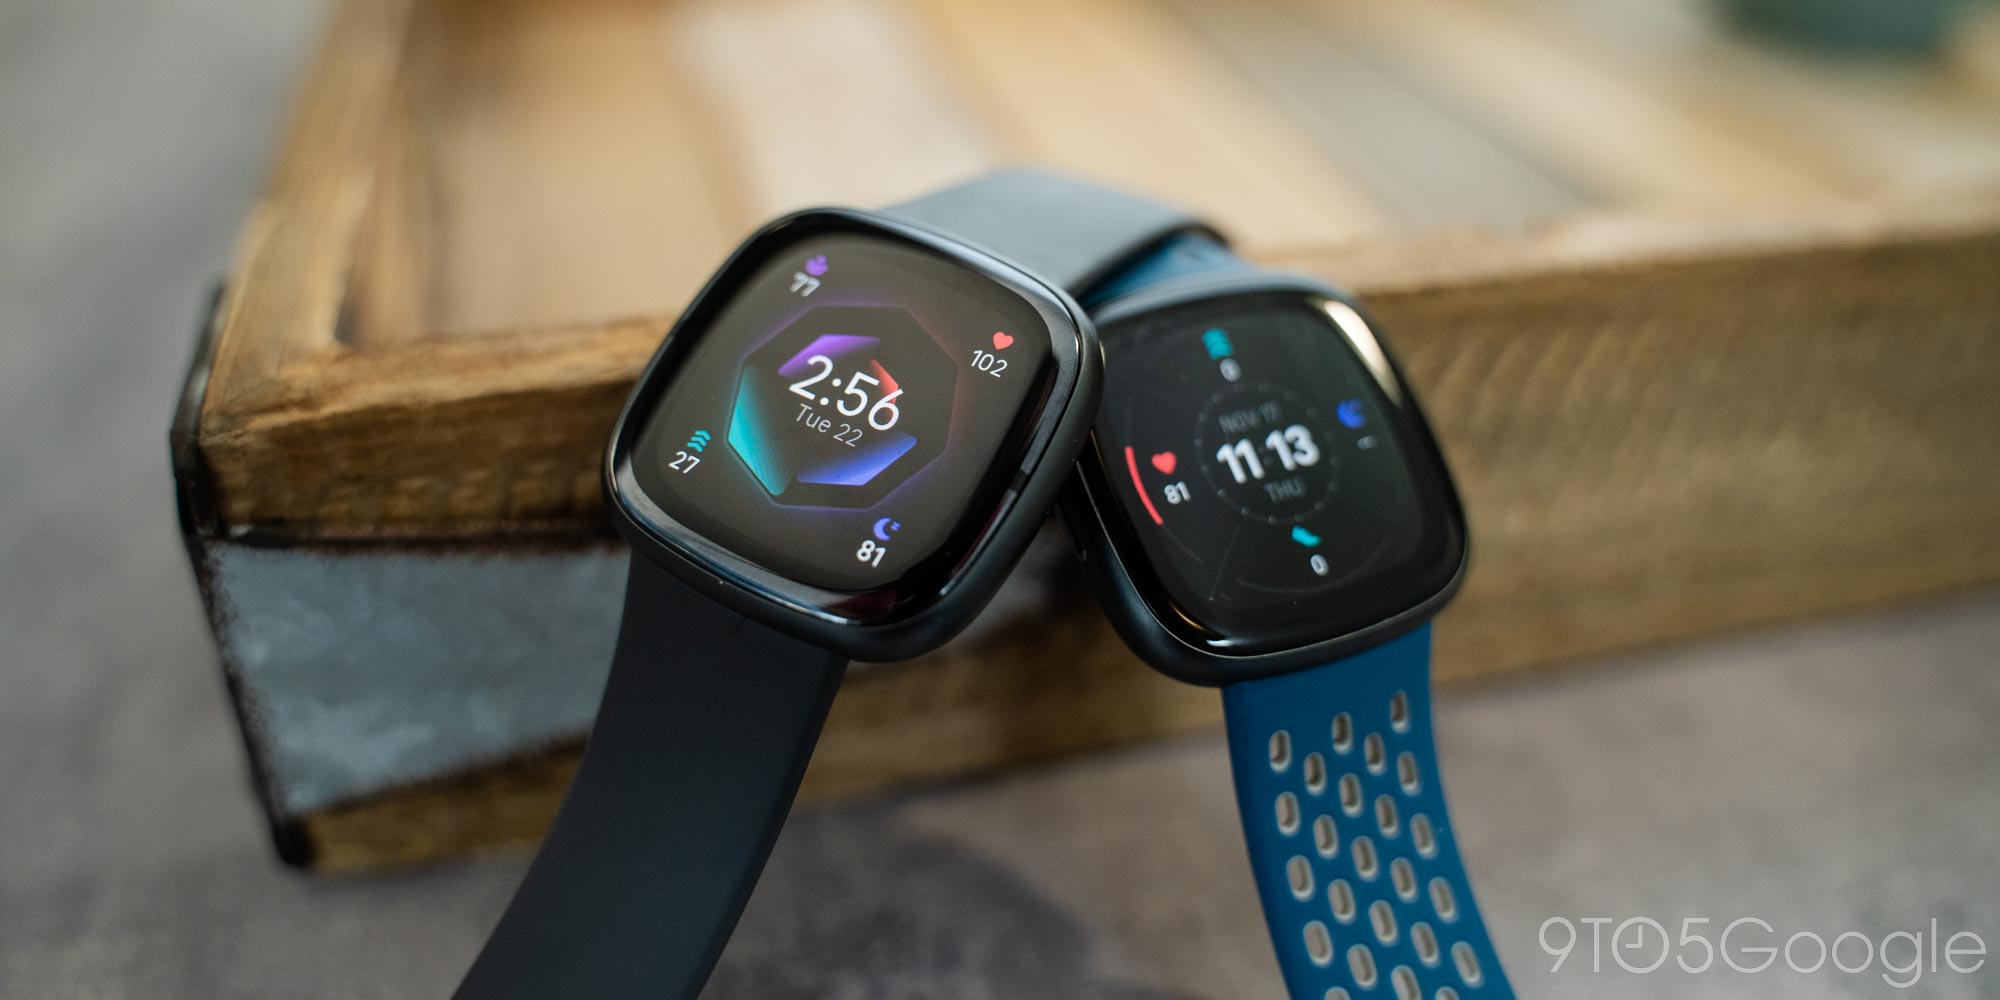 9to5Google Log Out: Does Fitbit still make a smartwatch?